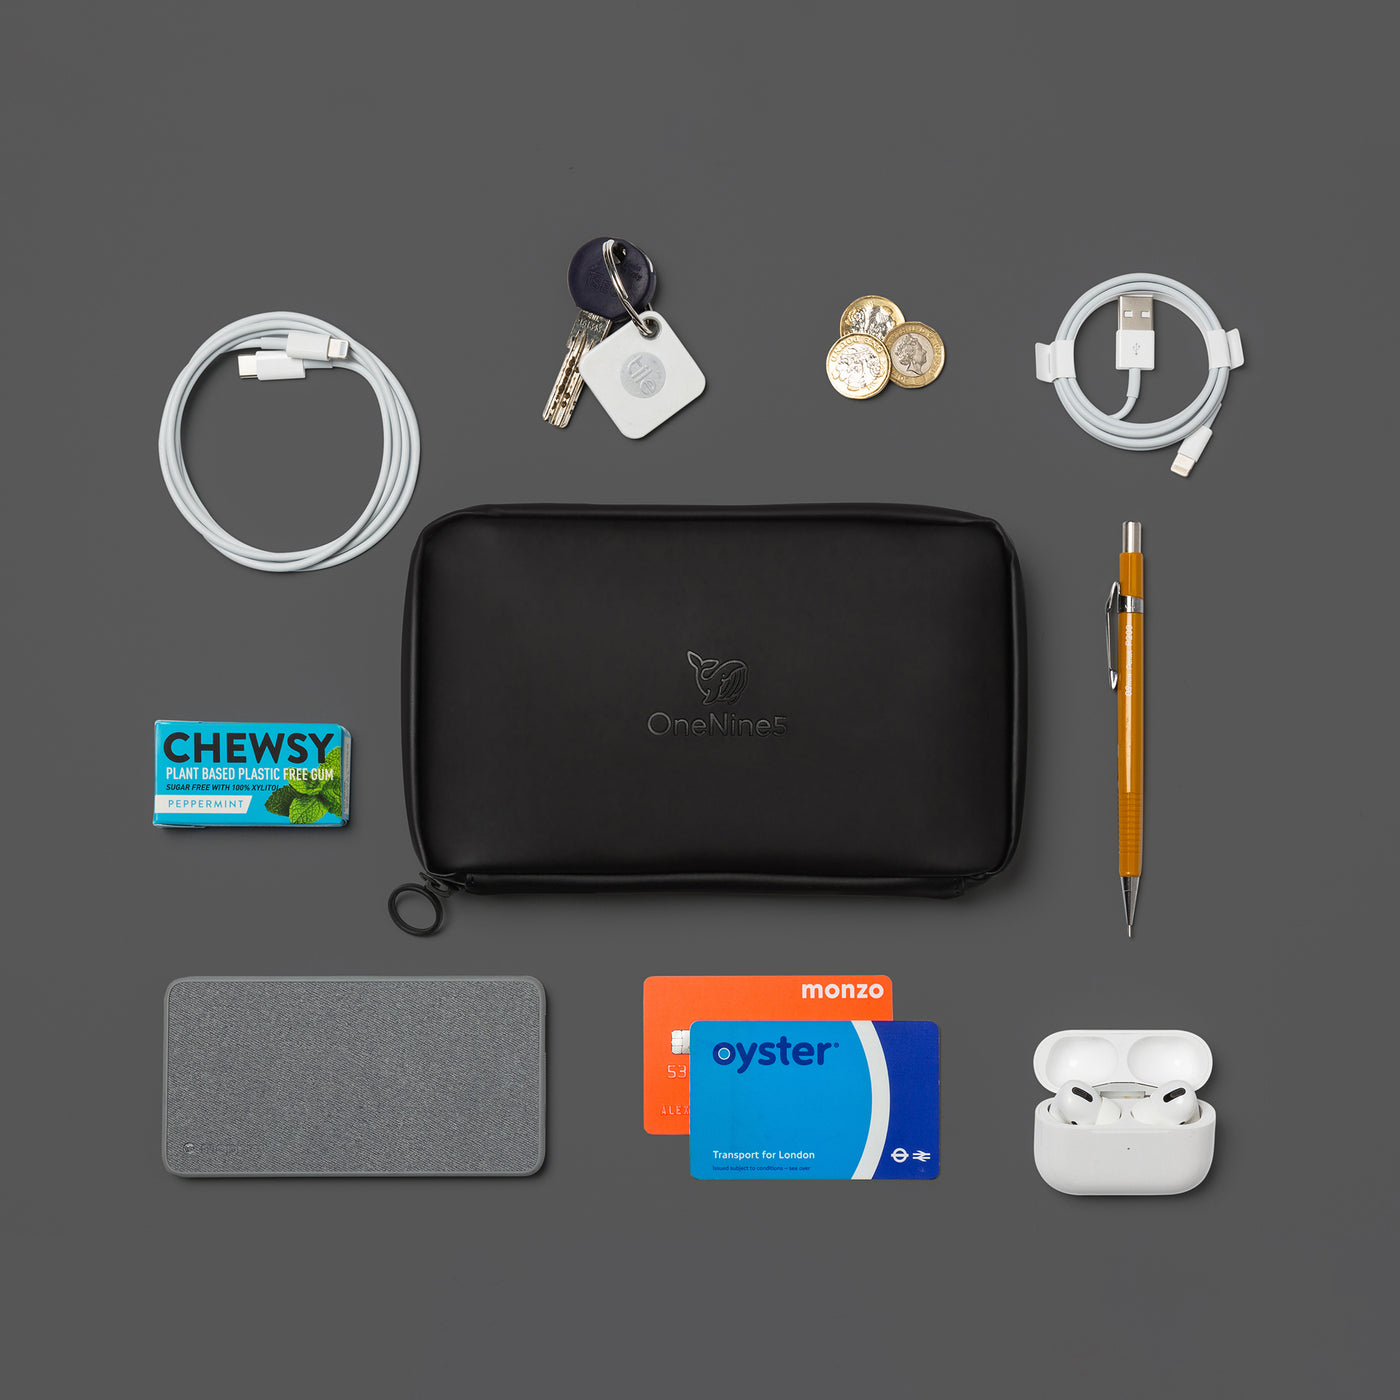 Birdseye image of the Miho Black Eco Essentials Pouch on a black background. the Eco Essentials Pouch is surrounded by an Apple lightning to USB cable, a yellow pencil, Apple Airpods, an Oyster card, Monzo Bank card, Mophie powerstation mini universal battery, Chewsy chewing gum, Apple USB-C to lightning cable, A key attached to a Tile Bluetooth tracker and three pound coins. These items fit inside the internal pockets and elastic loops.